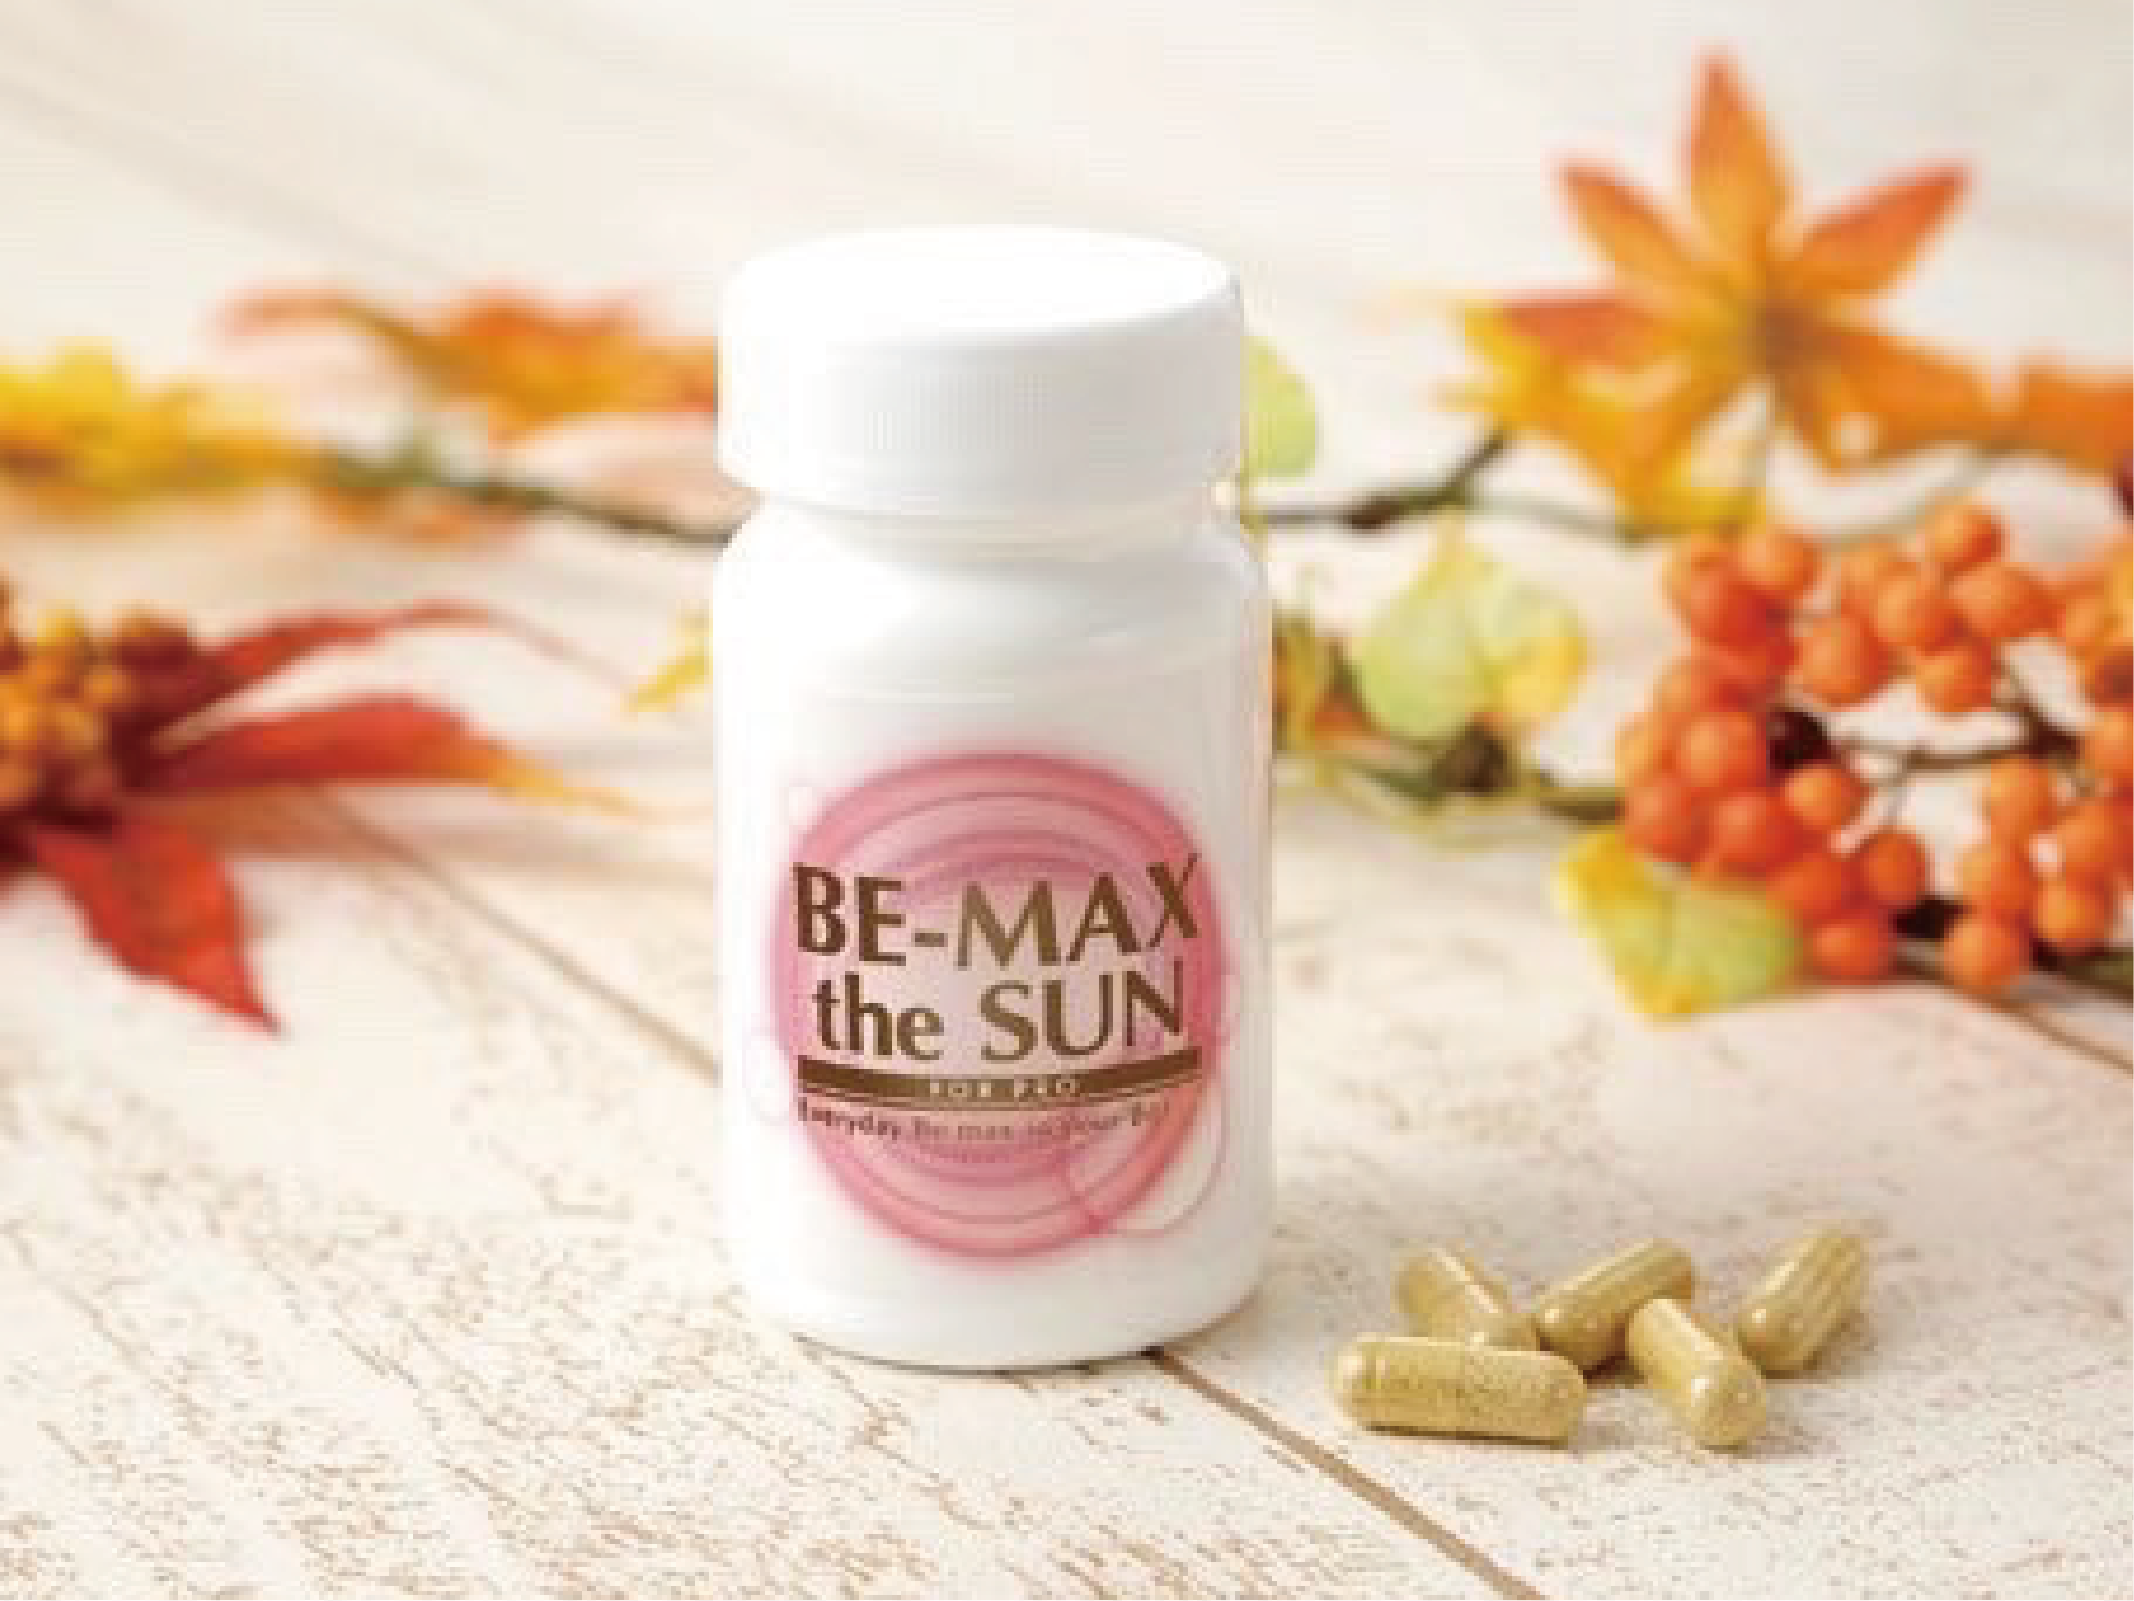 BE-MAX the SUN | hmgrocerant.com